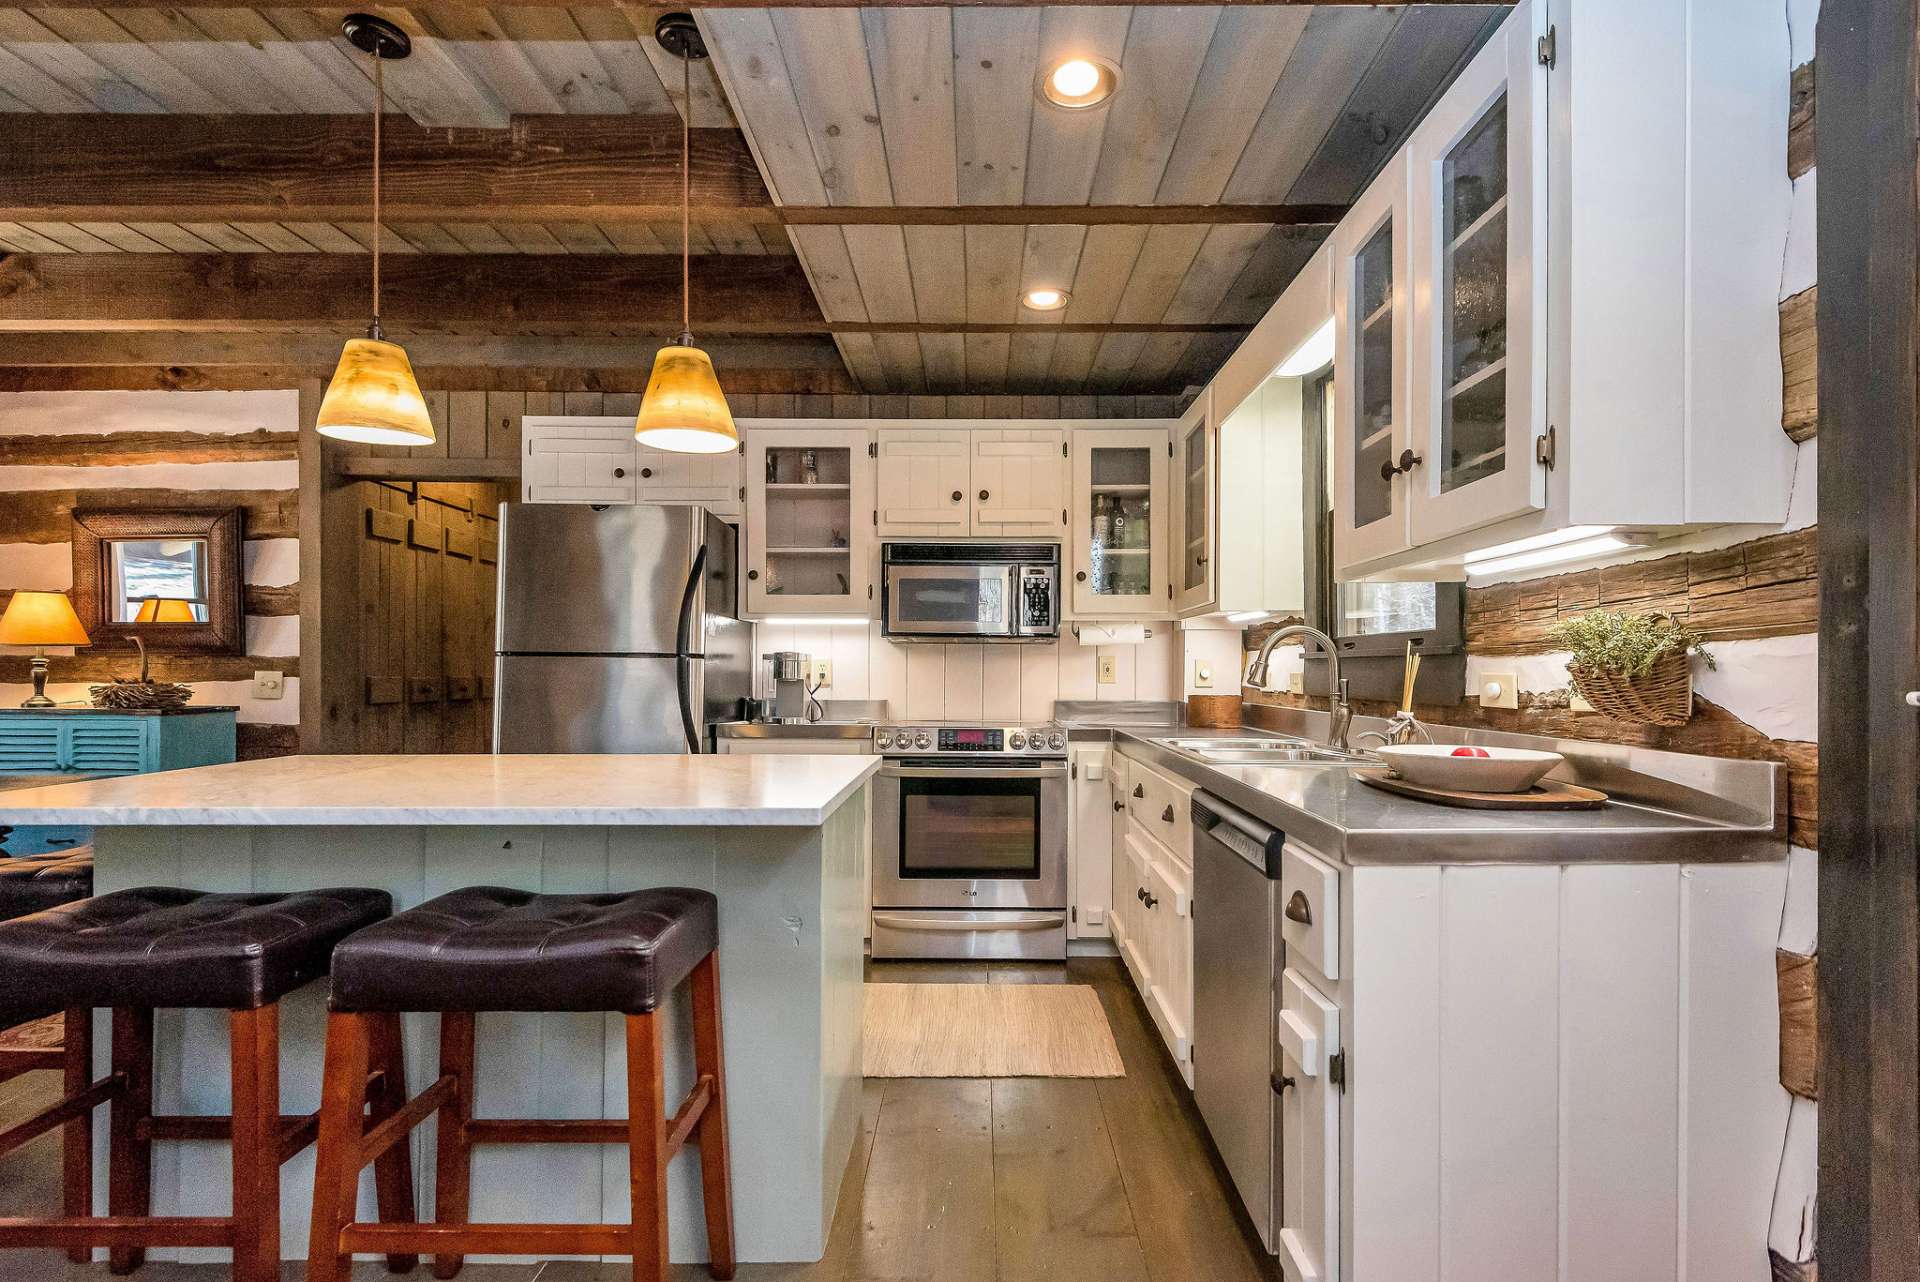 Overall, this kitchen strikes the perfect balance between old-world charm and modern convenience, offering a stylish and functional space where cooking, dining, and socializing come together seamlessly.